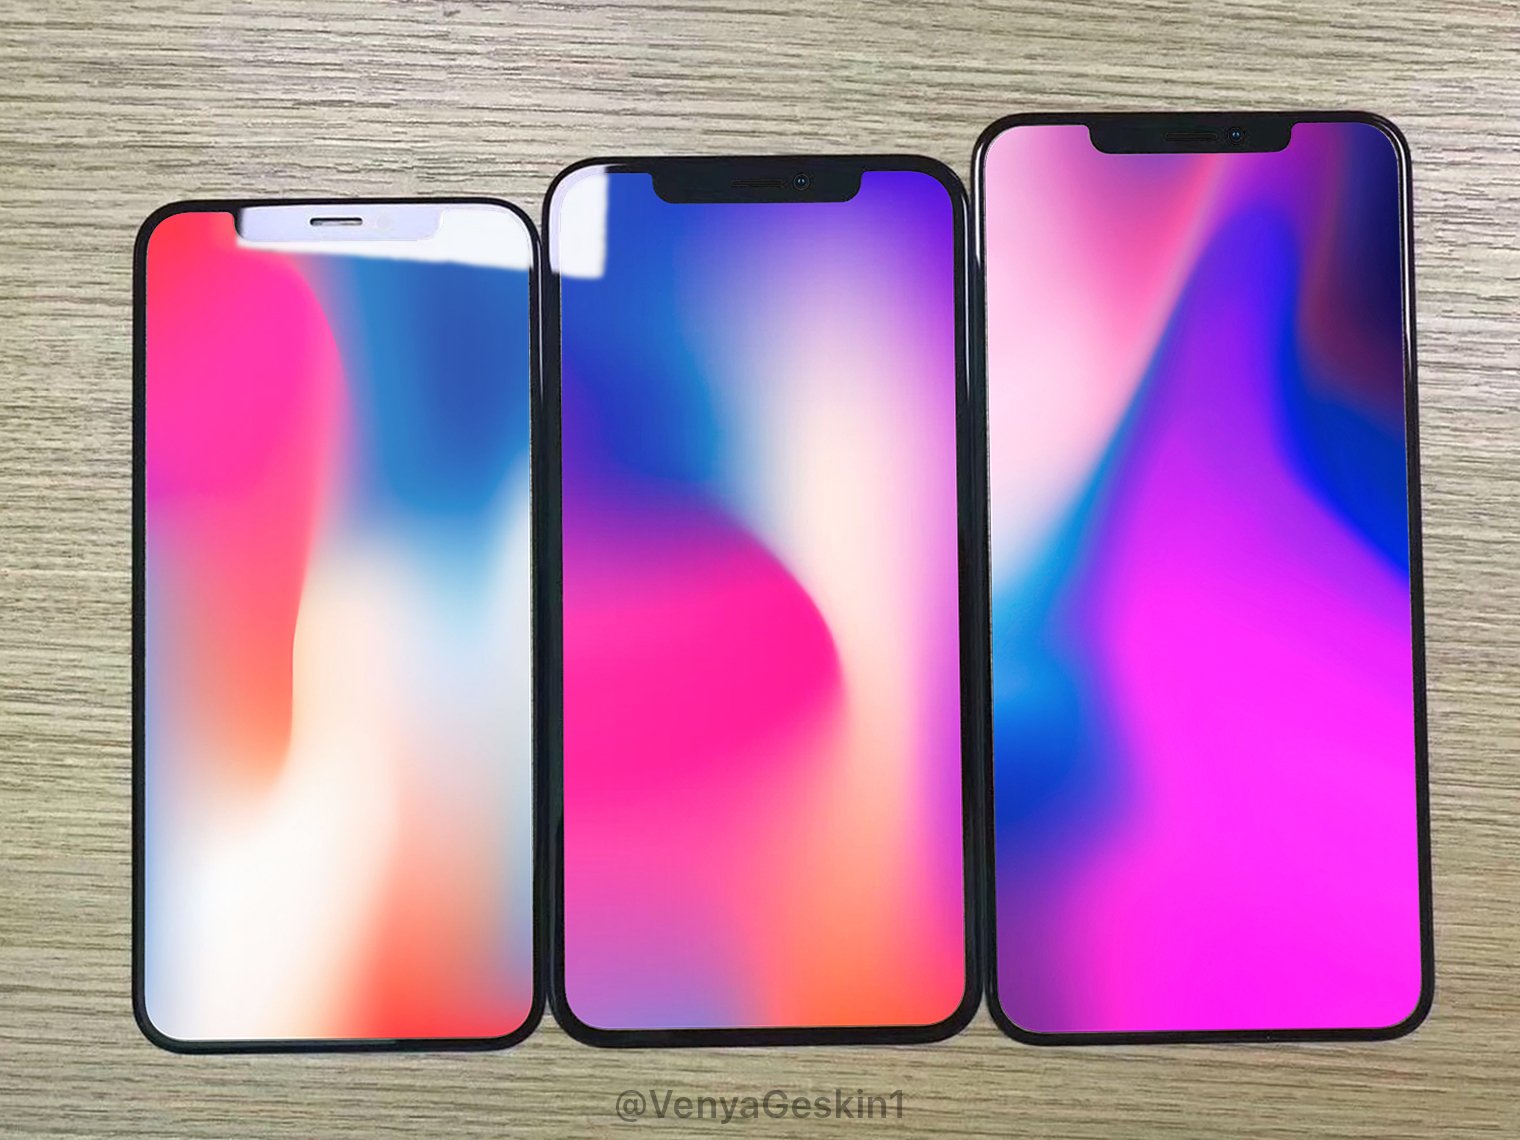 Front Glass Panels for 2018 iPhones Appear to Leak, Show Thicker Bezels on 6.1-Inch LCD Model